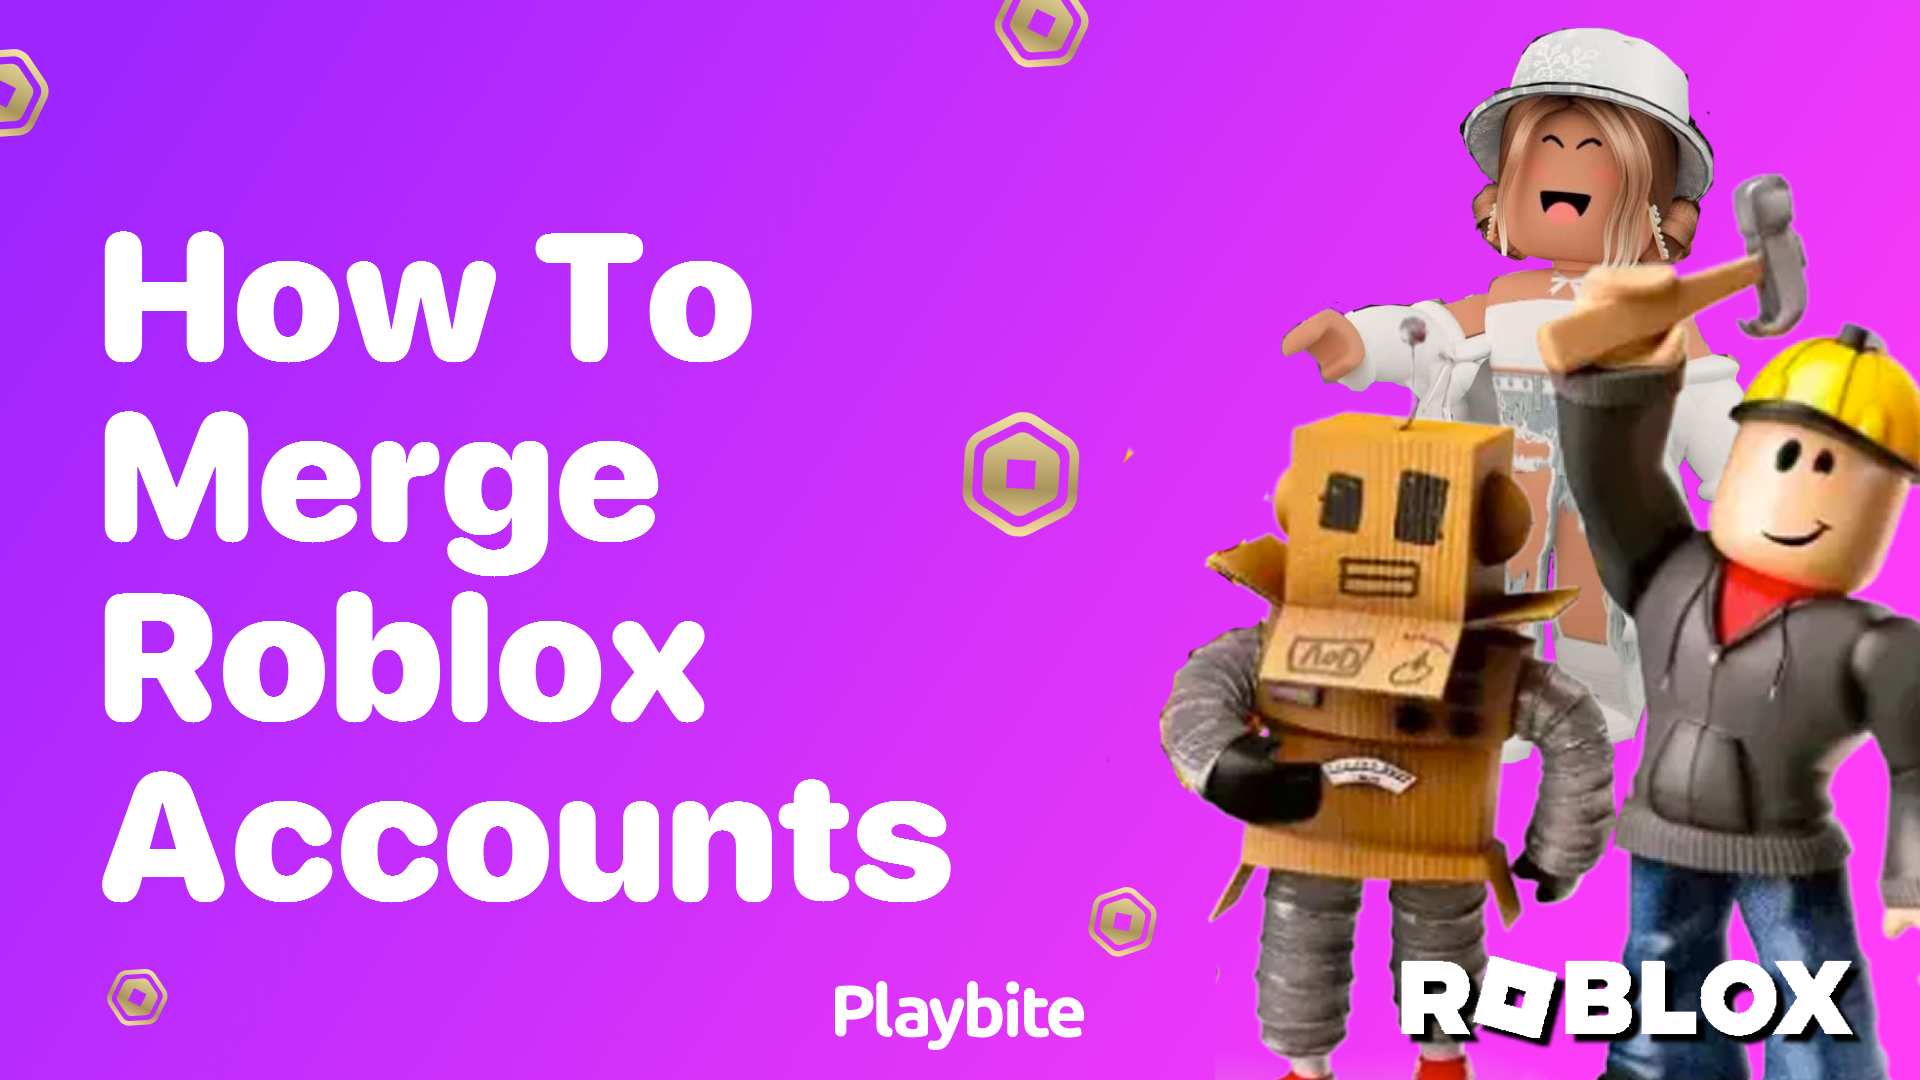 How to Merge Roblox Accounts: Is it Possible?